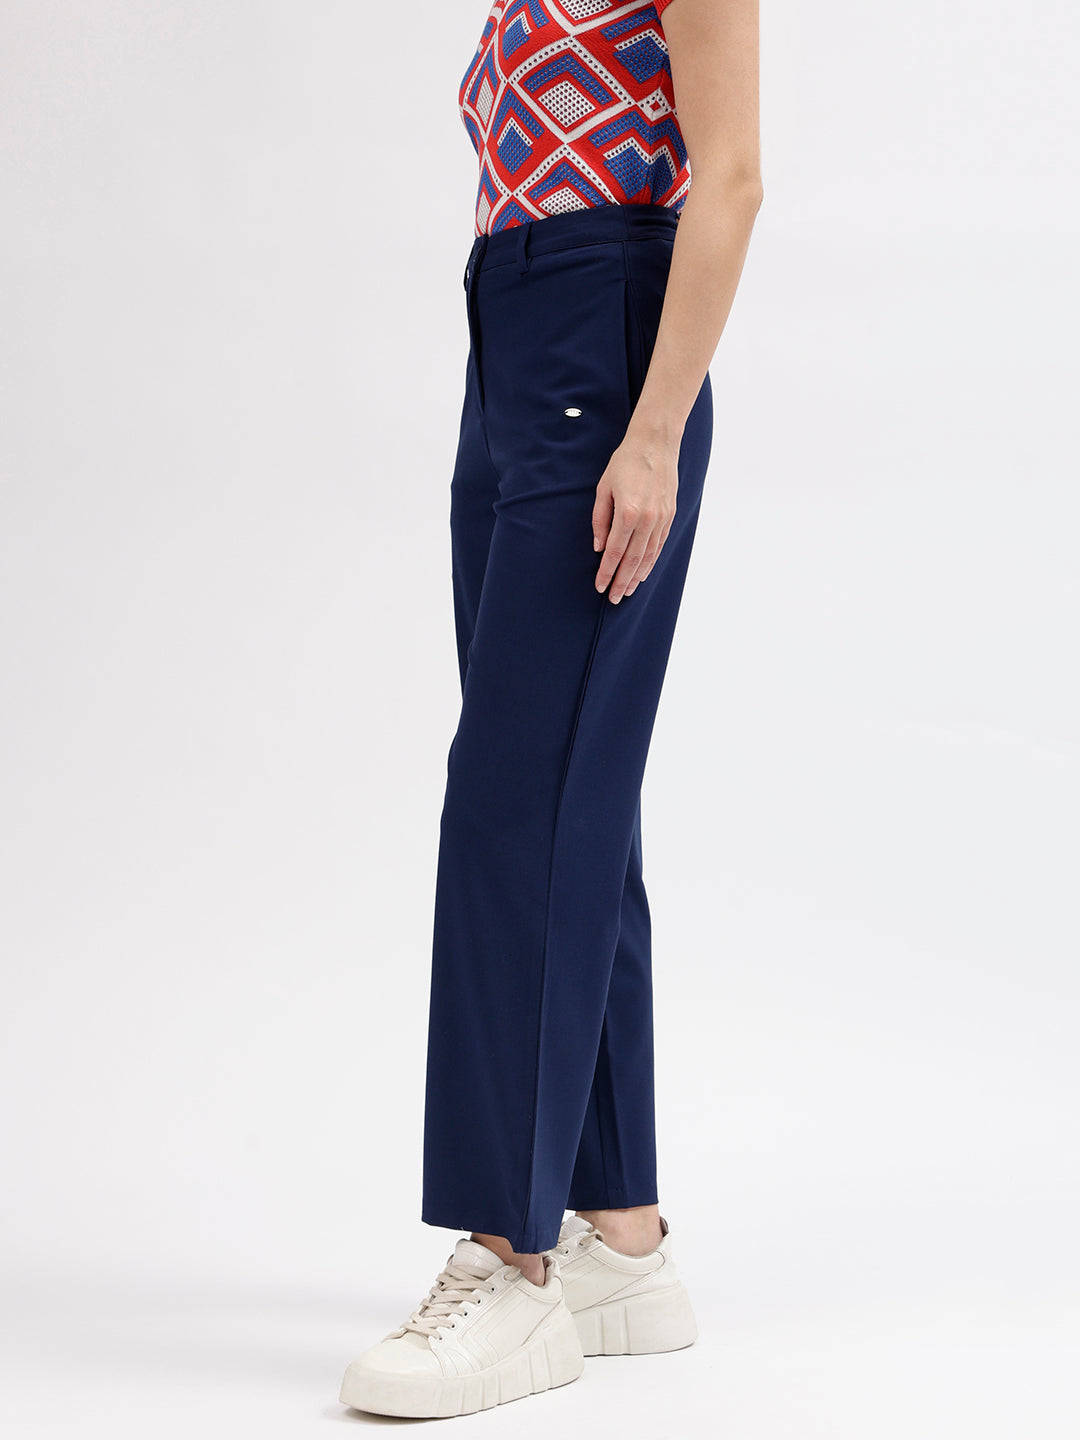 Buy Trousers For Women/Ladies Online In India At Best Price